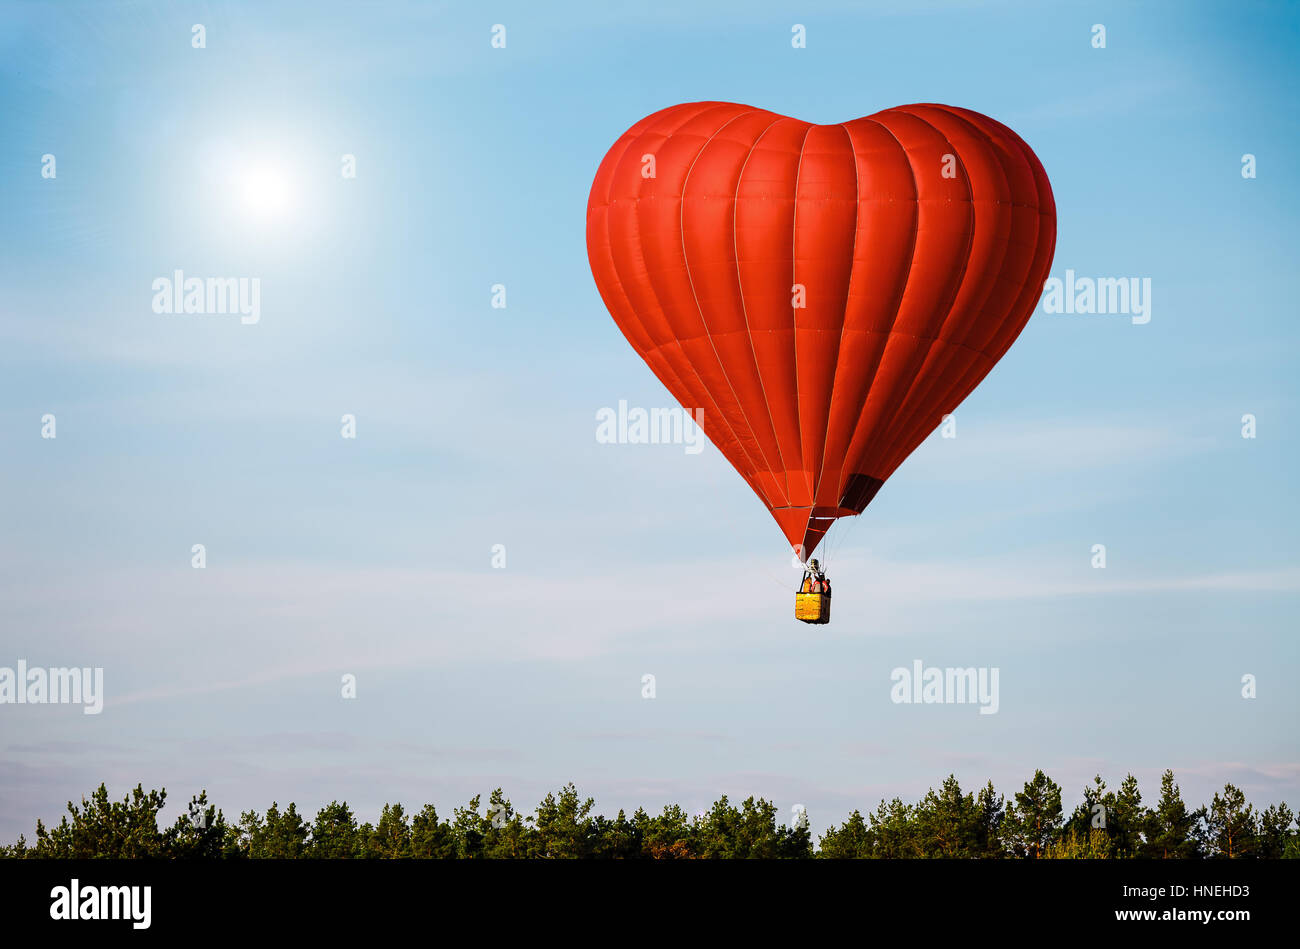 Red air balloon in the shape of a heart flying in blue sky Stock Photo